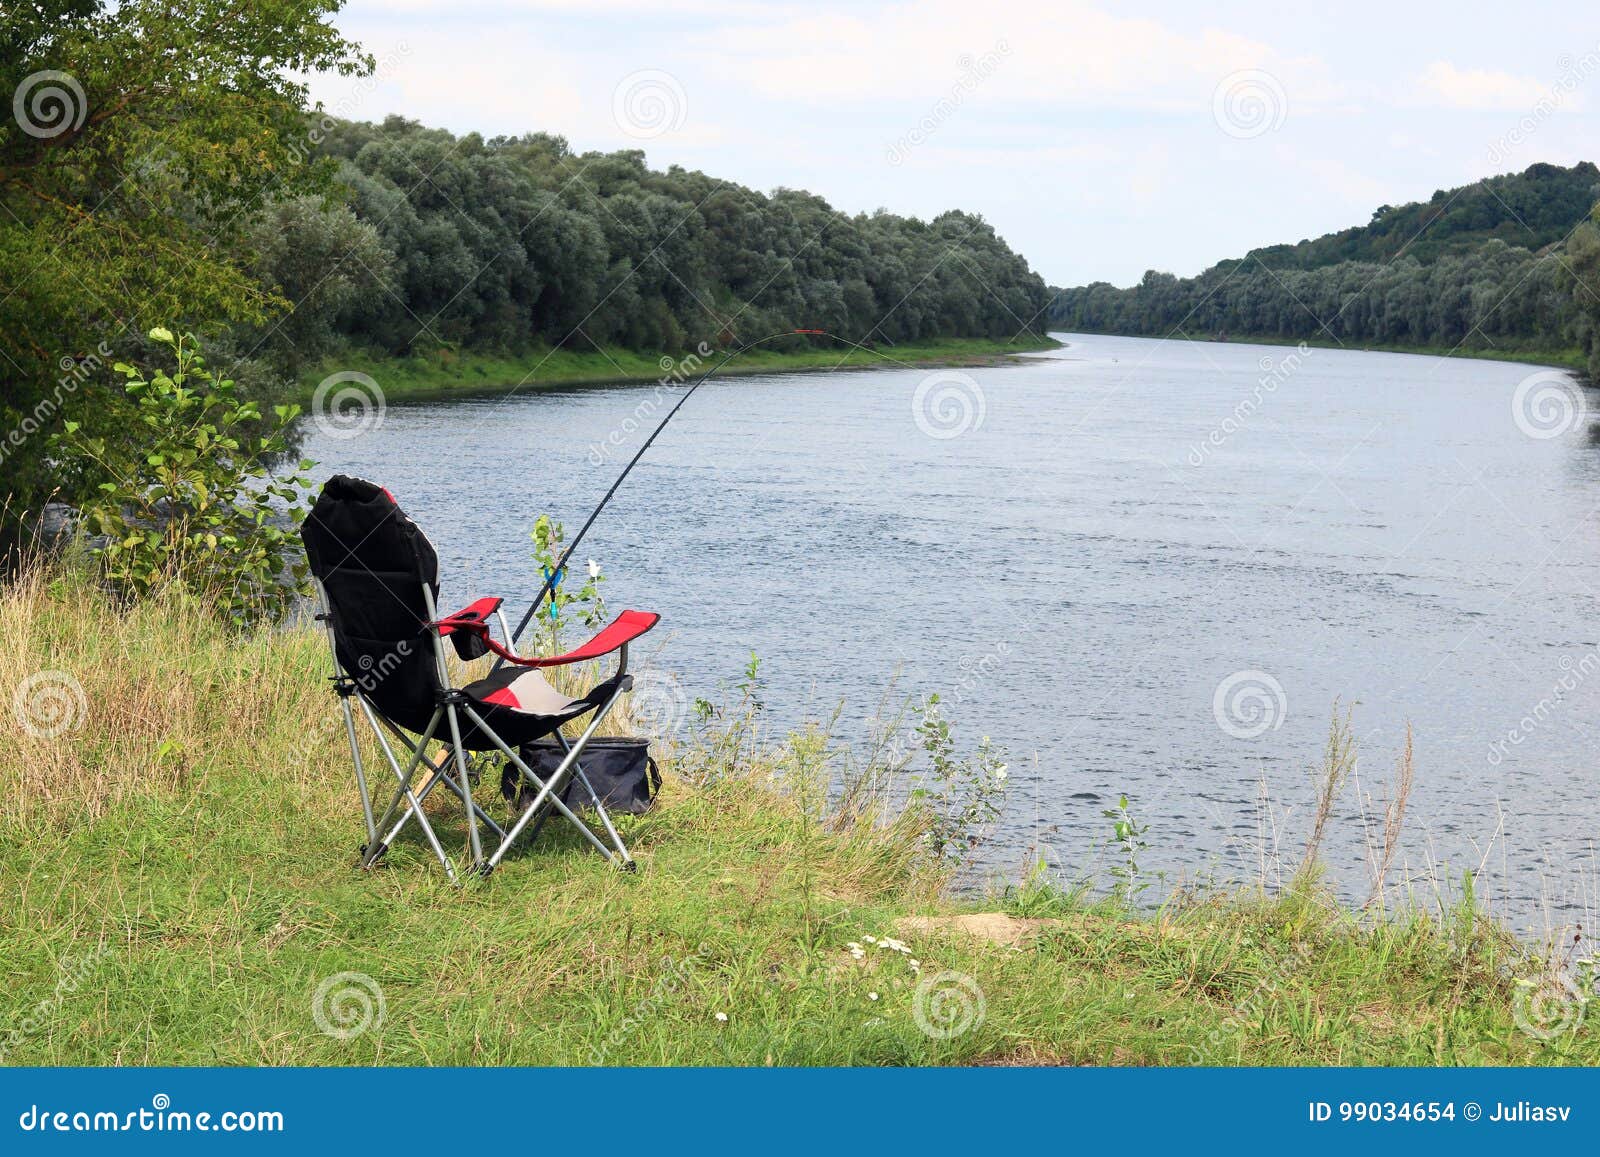 Fishing Chair, Rod and Bait on the River Bank Stock Photo - Image